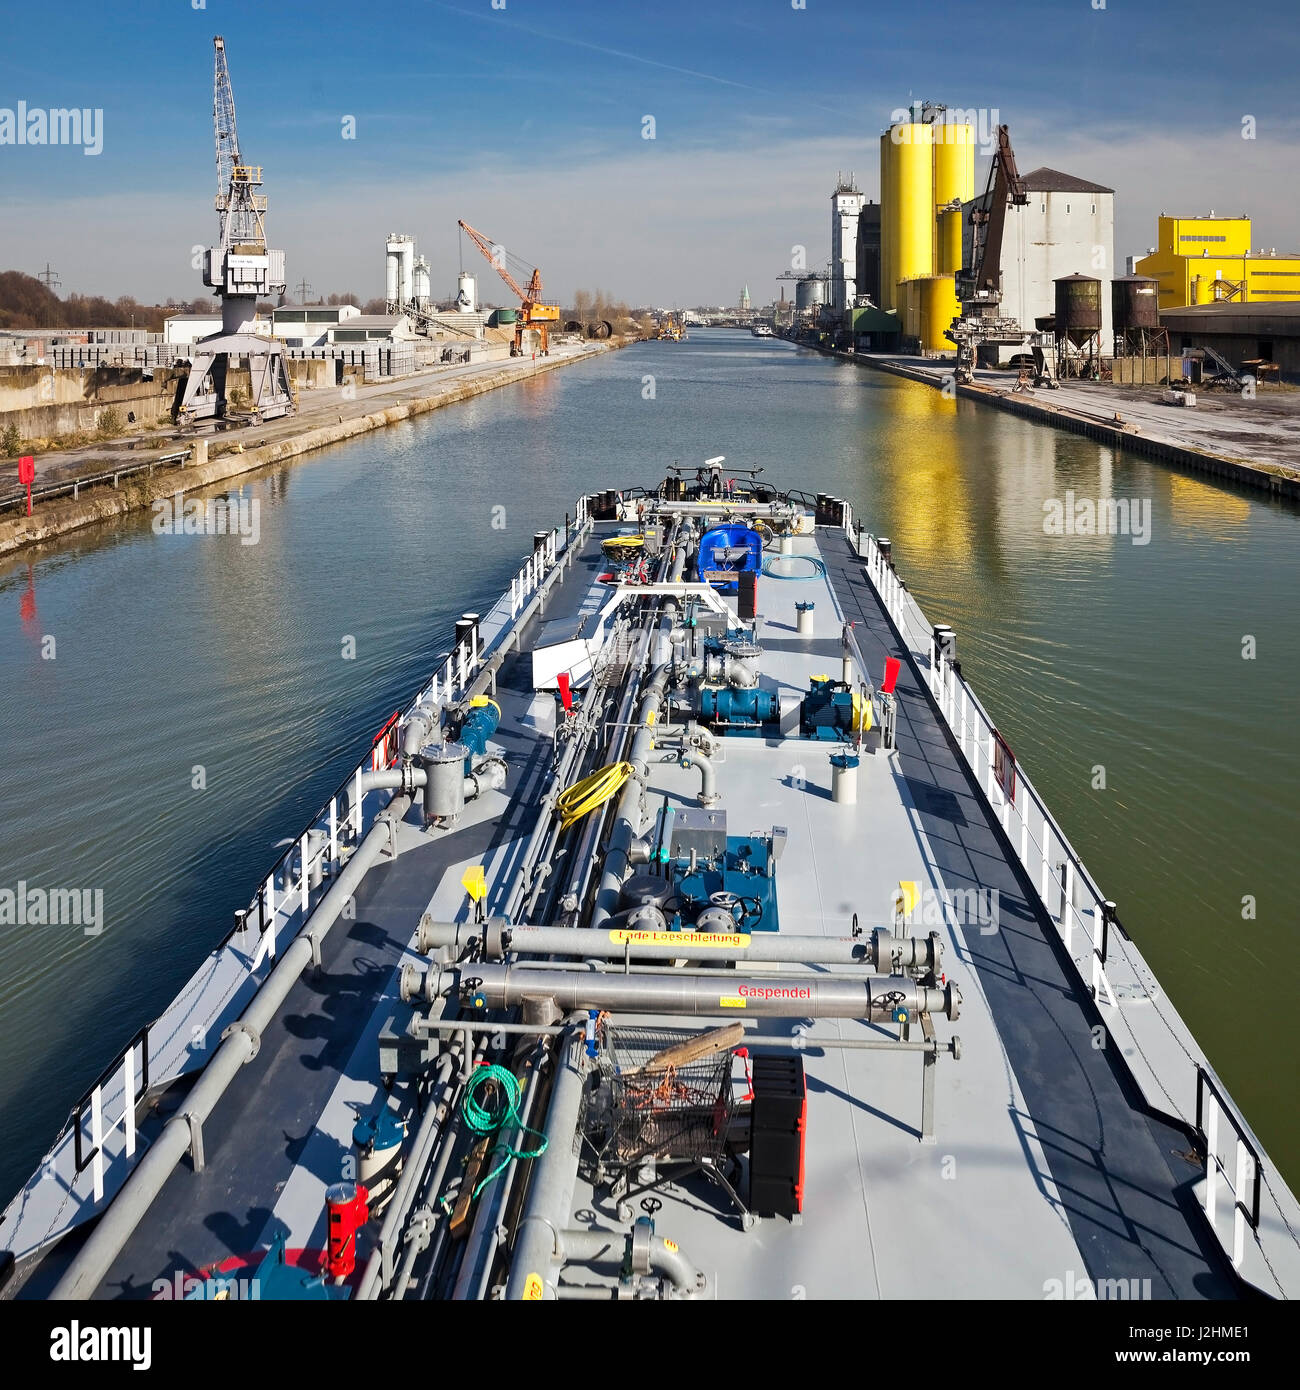 Cargo ship on the Datteln-Hamm Canal in city port, Hamm, Ruhr district, North Rhine-Westphalia, Germany Stock Photo